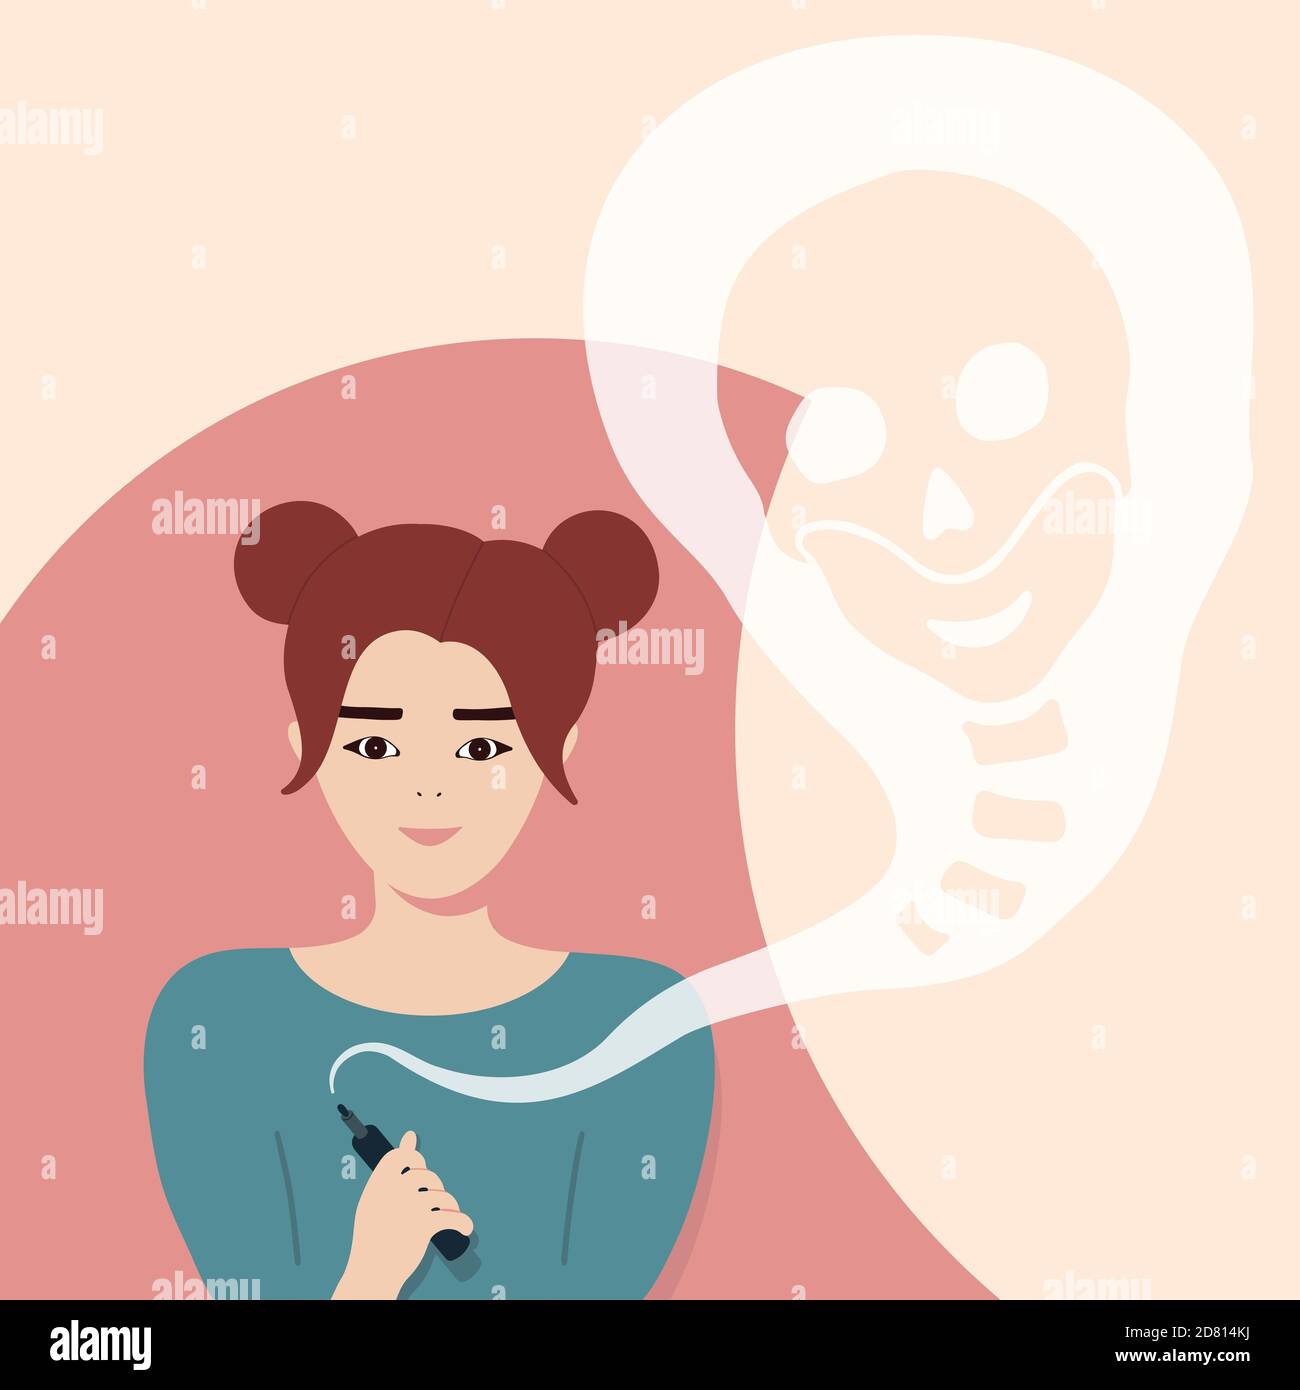 Vector illustration with A Korean girl vaping or smokes an e-cigarette, smoke from which in the shape of a skull symbolizes harm to health. Stock Vector